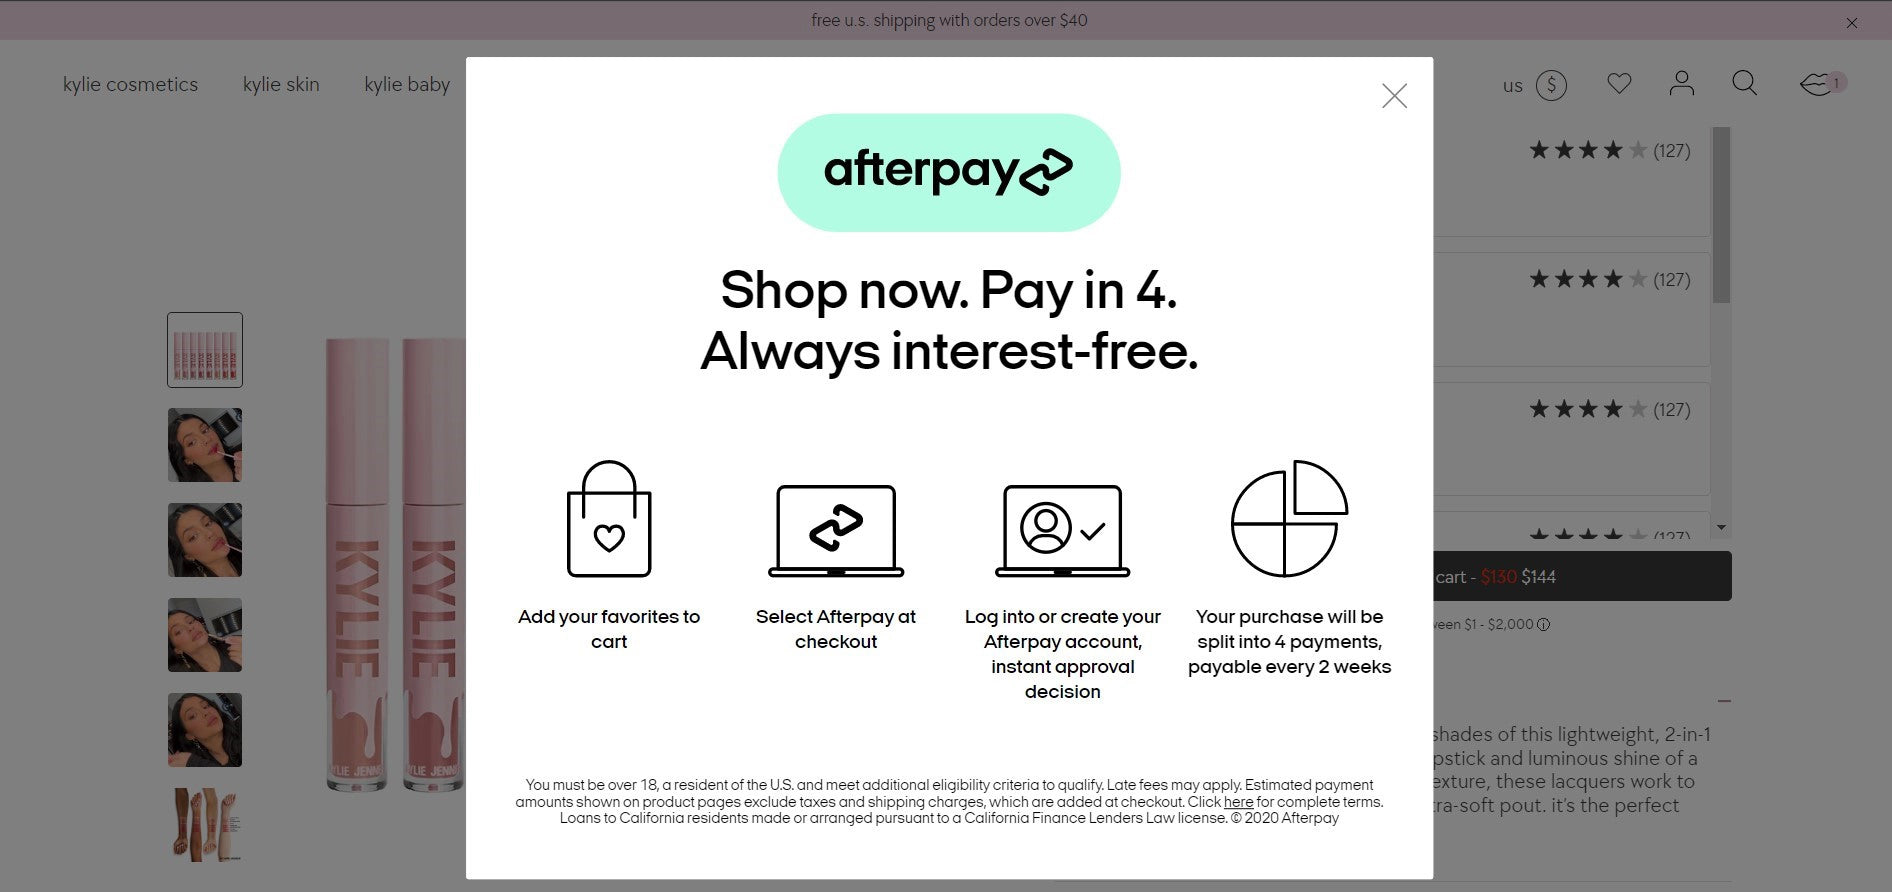 Product page of Kylie Cosmetics with Afterpay payment option